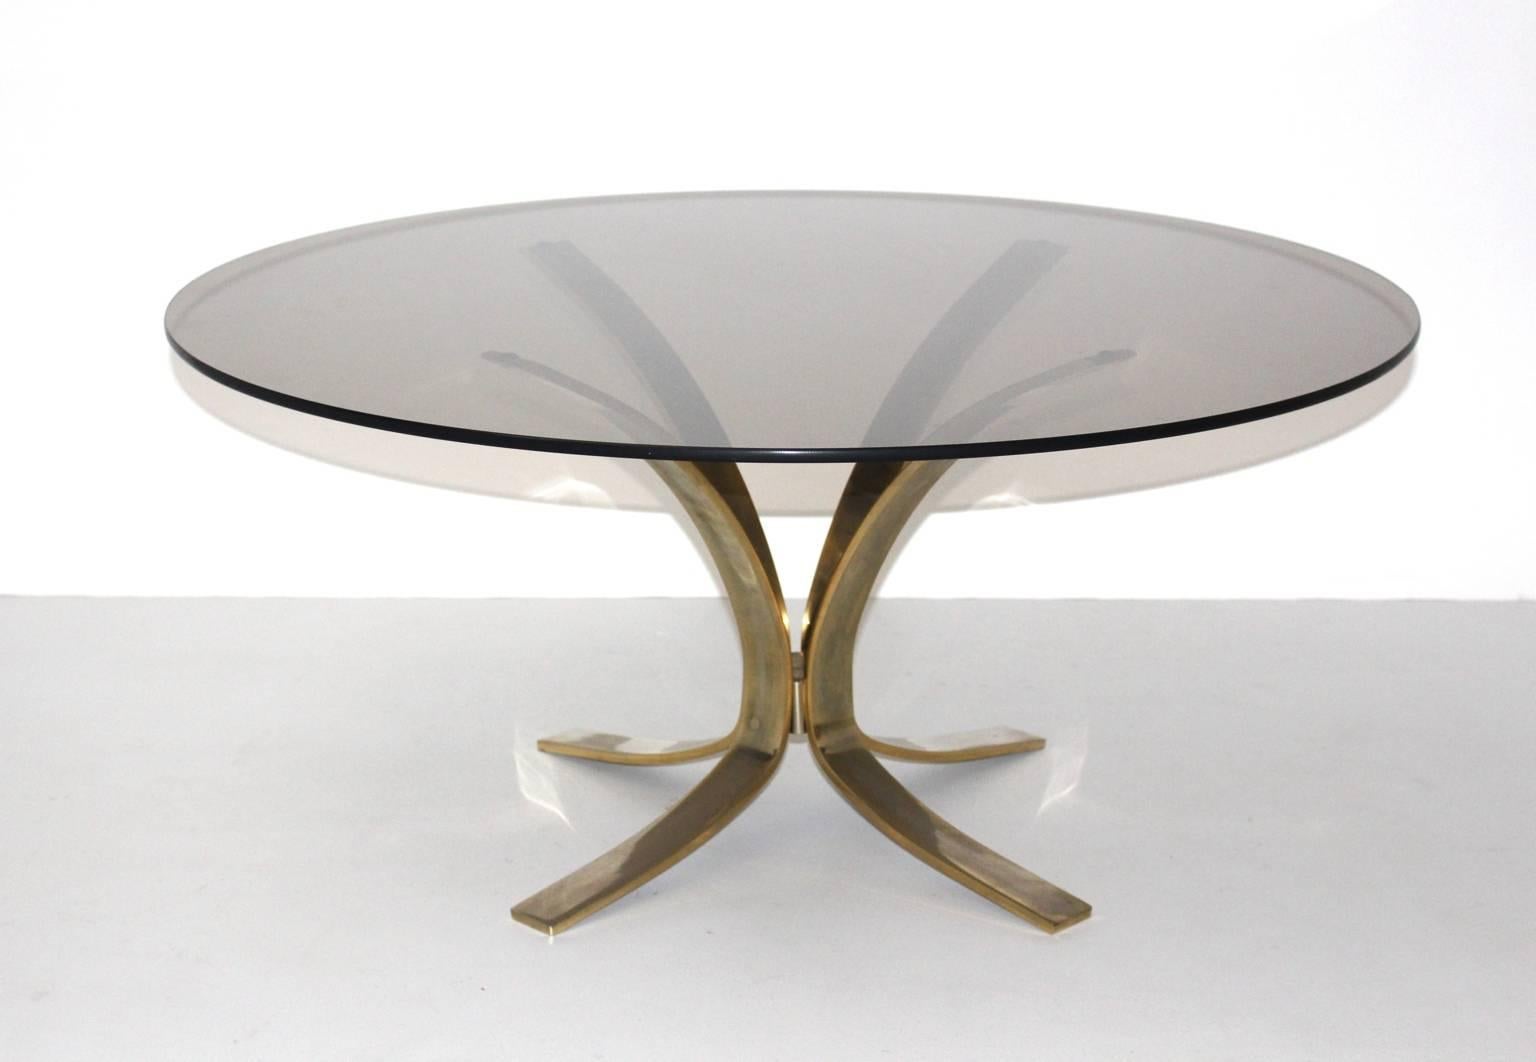 The coffee table was designed by Roger Sprunger 1960s, and produced by Dunbar Furniture, USA.

The coffee table has a brass-plated base and a round smoked glass top in very good condition with minor signs of age and use.
The base has a wonderful